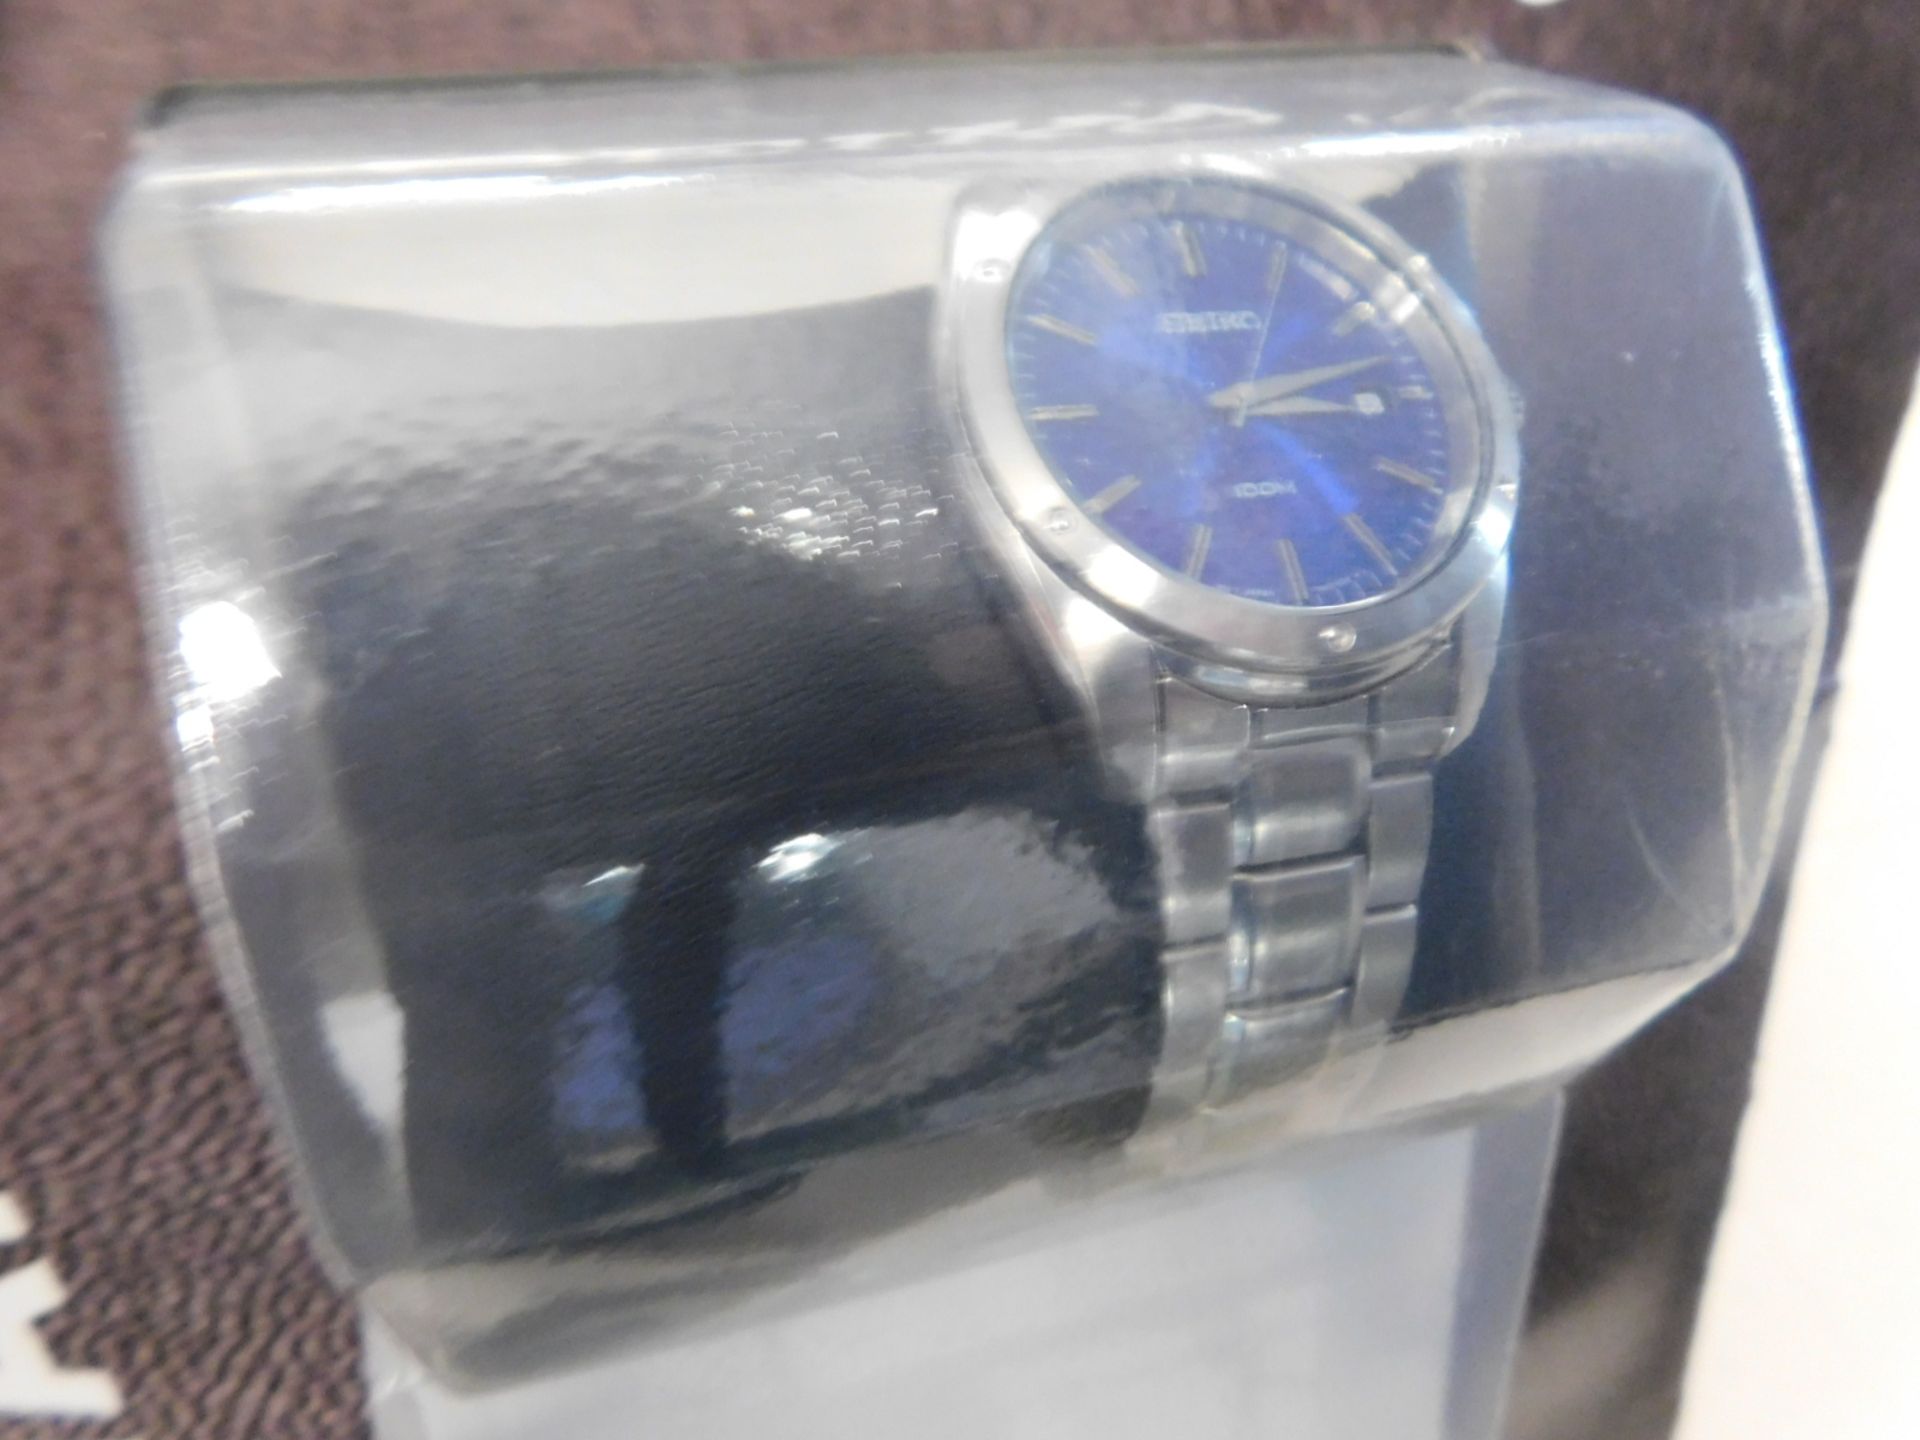 1 SEALLED SEIKO BLUE DIAL STAINLESS STEEL MENS WATCH MODEL SGEF77 RRP £199